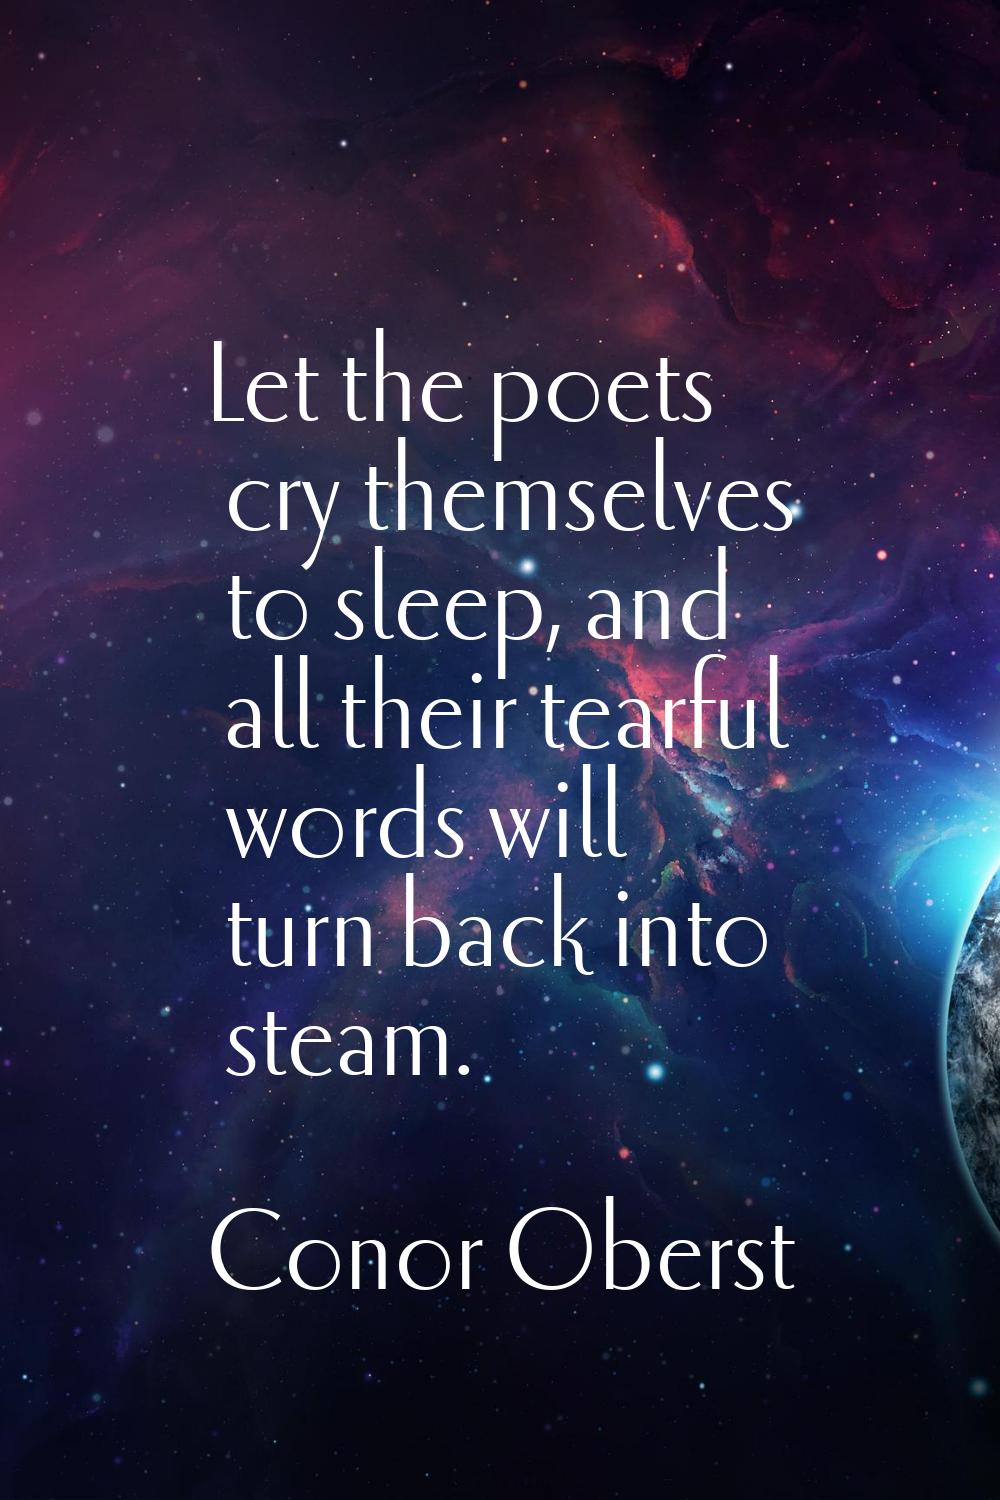 Let the poets cry themselves to sleep, and all their tearful words will turn back into steam.